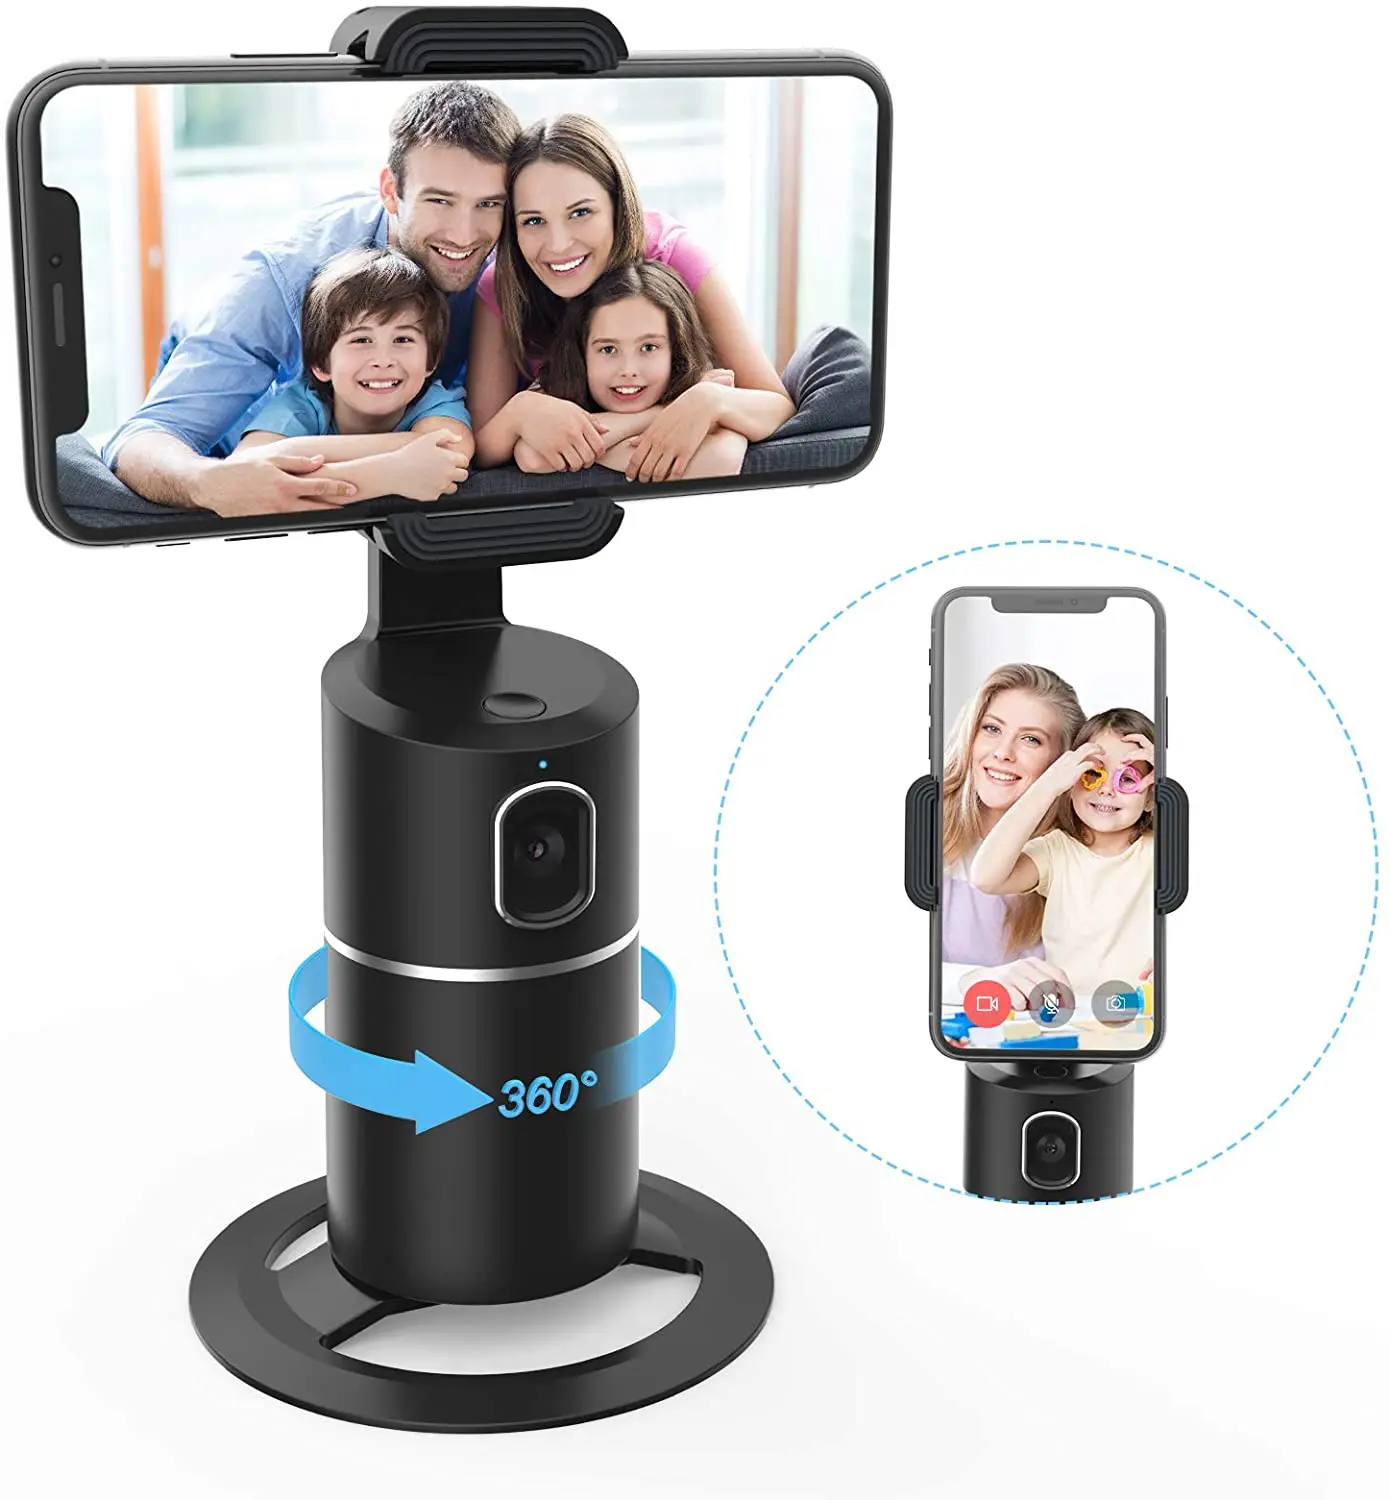 

2021 New Functional For Live Streaming And Vlog Smart Auto Face Tracking Gimbal Stabilizer Tripod Phone Holder